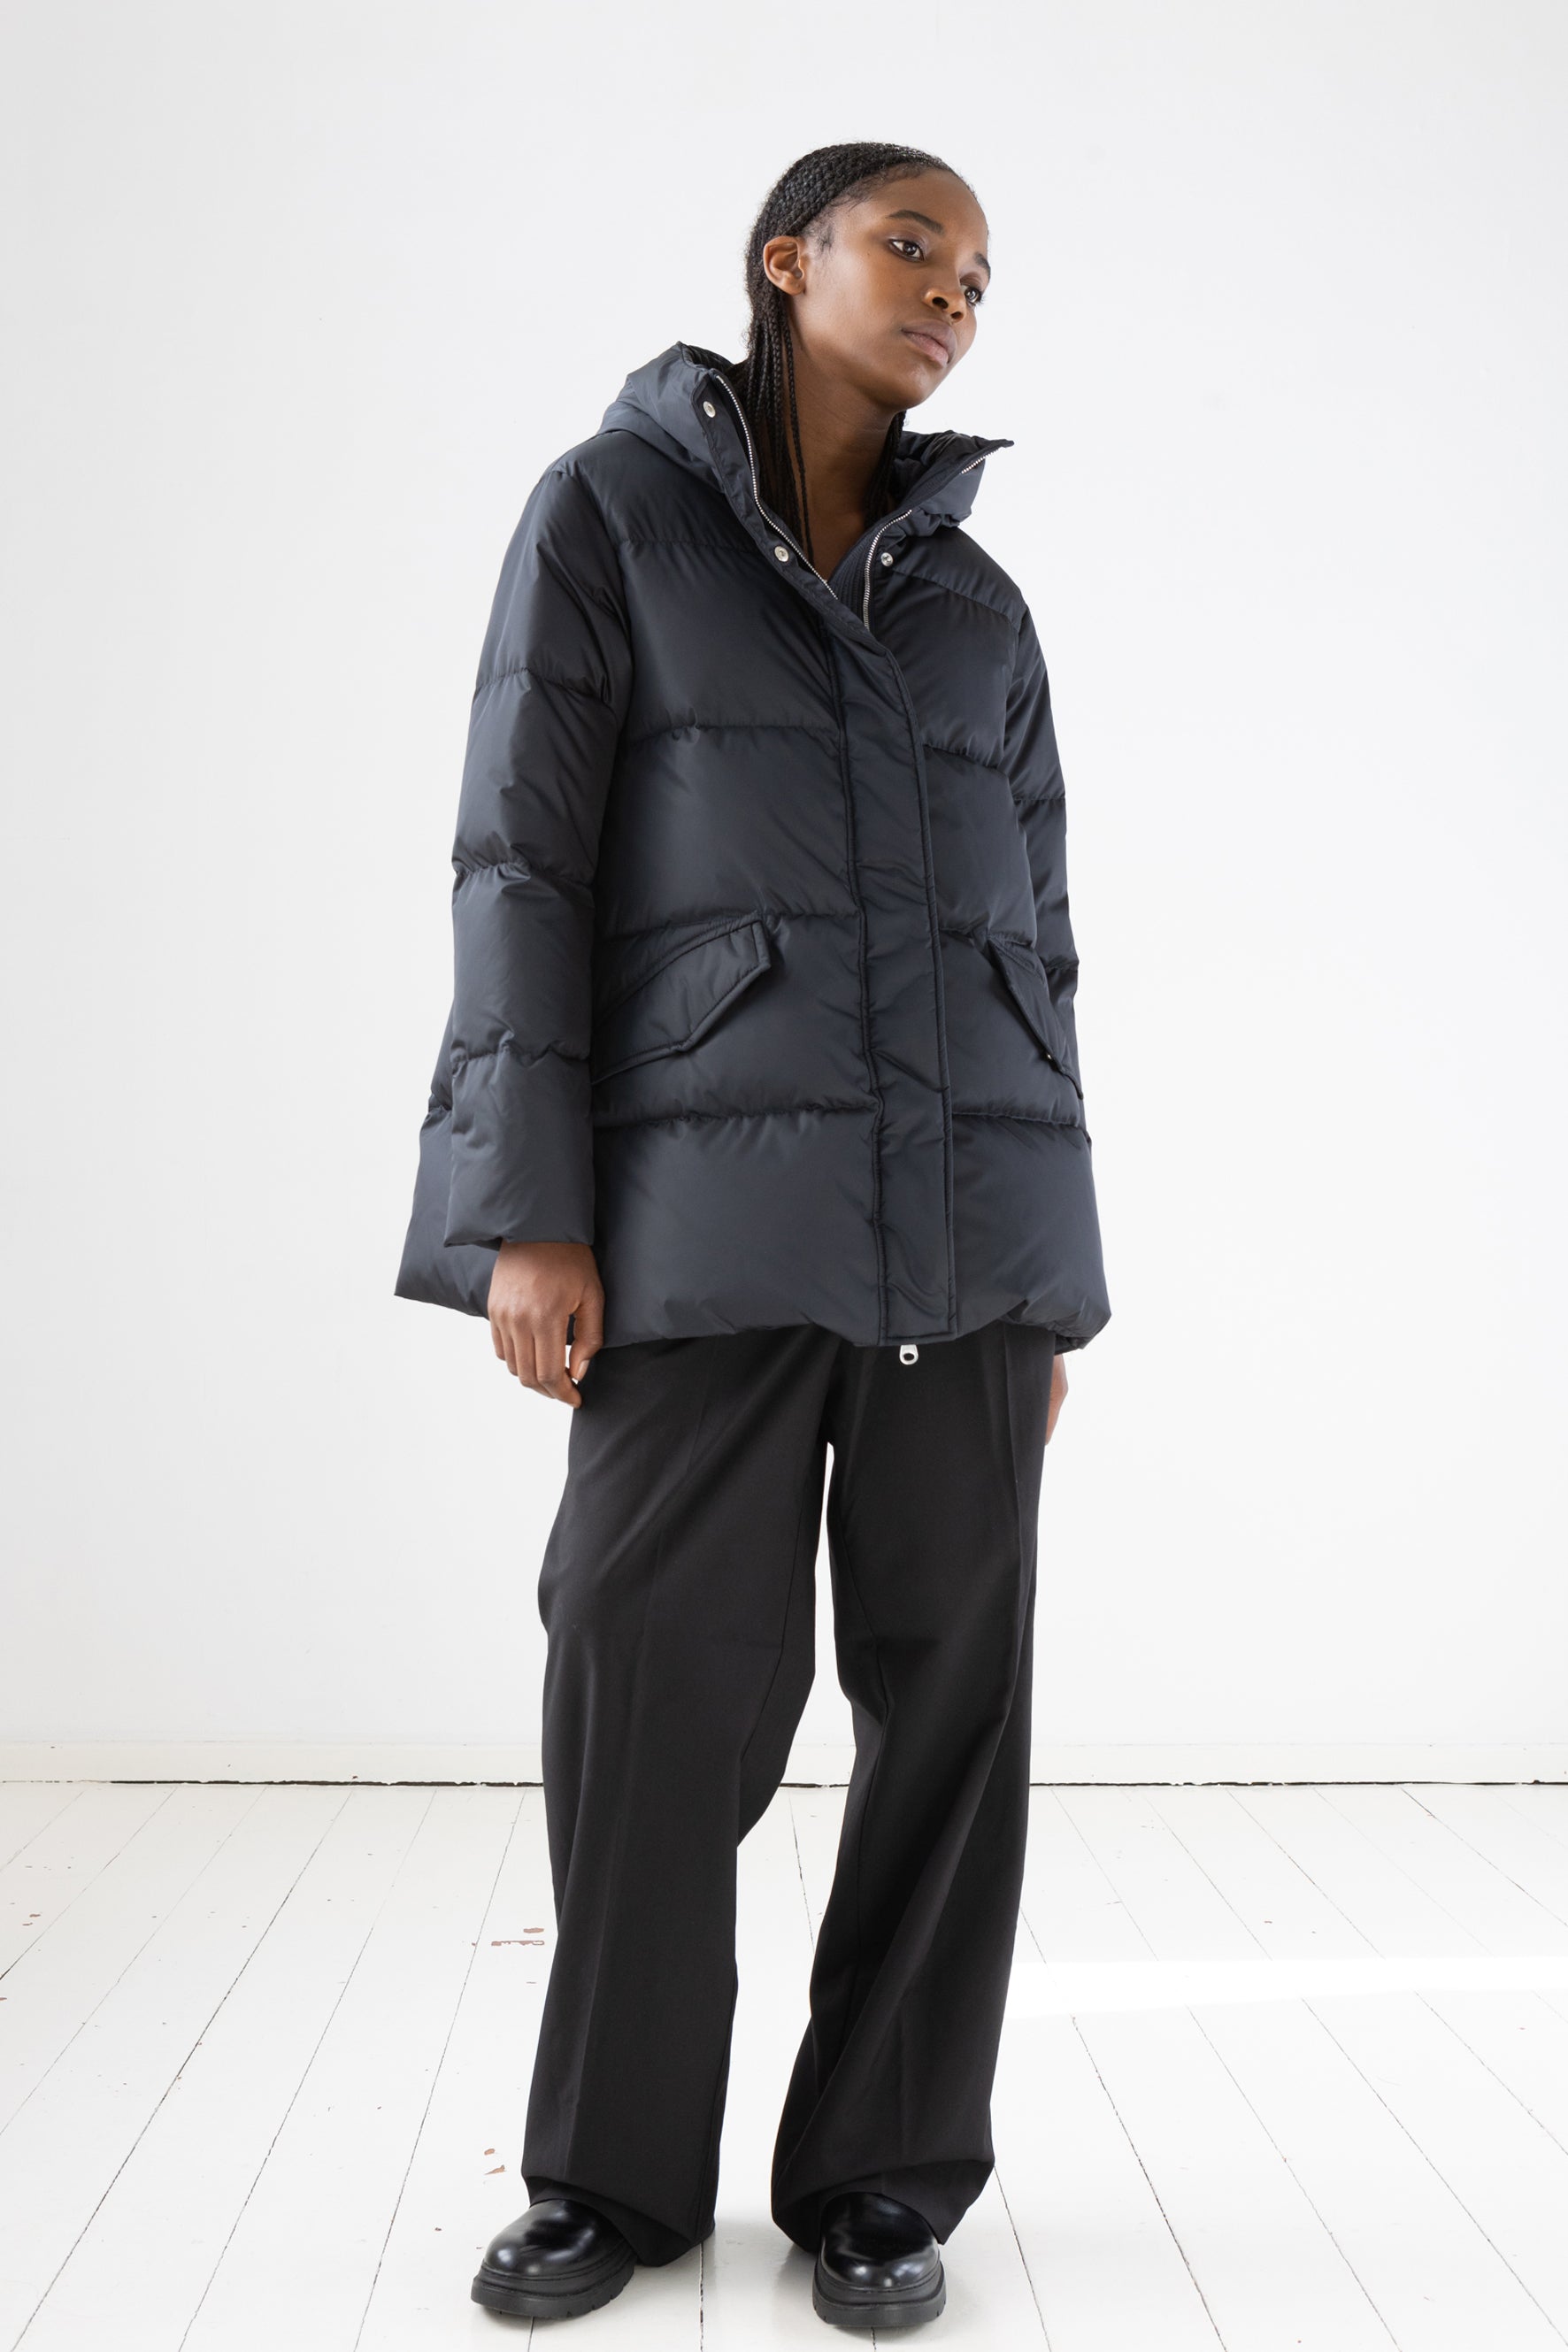 Short quilted down jacket with softly lined hood in dark blue